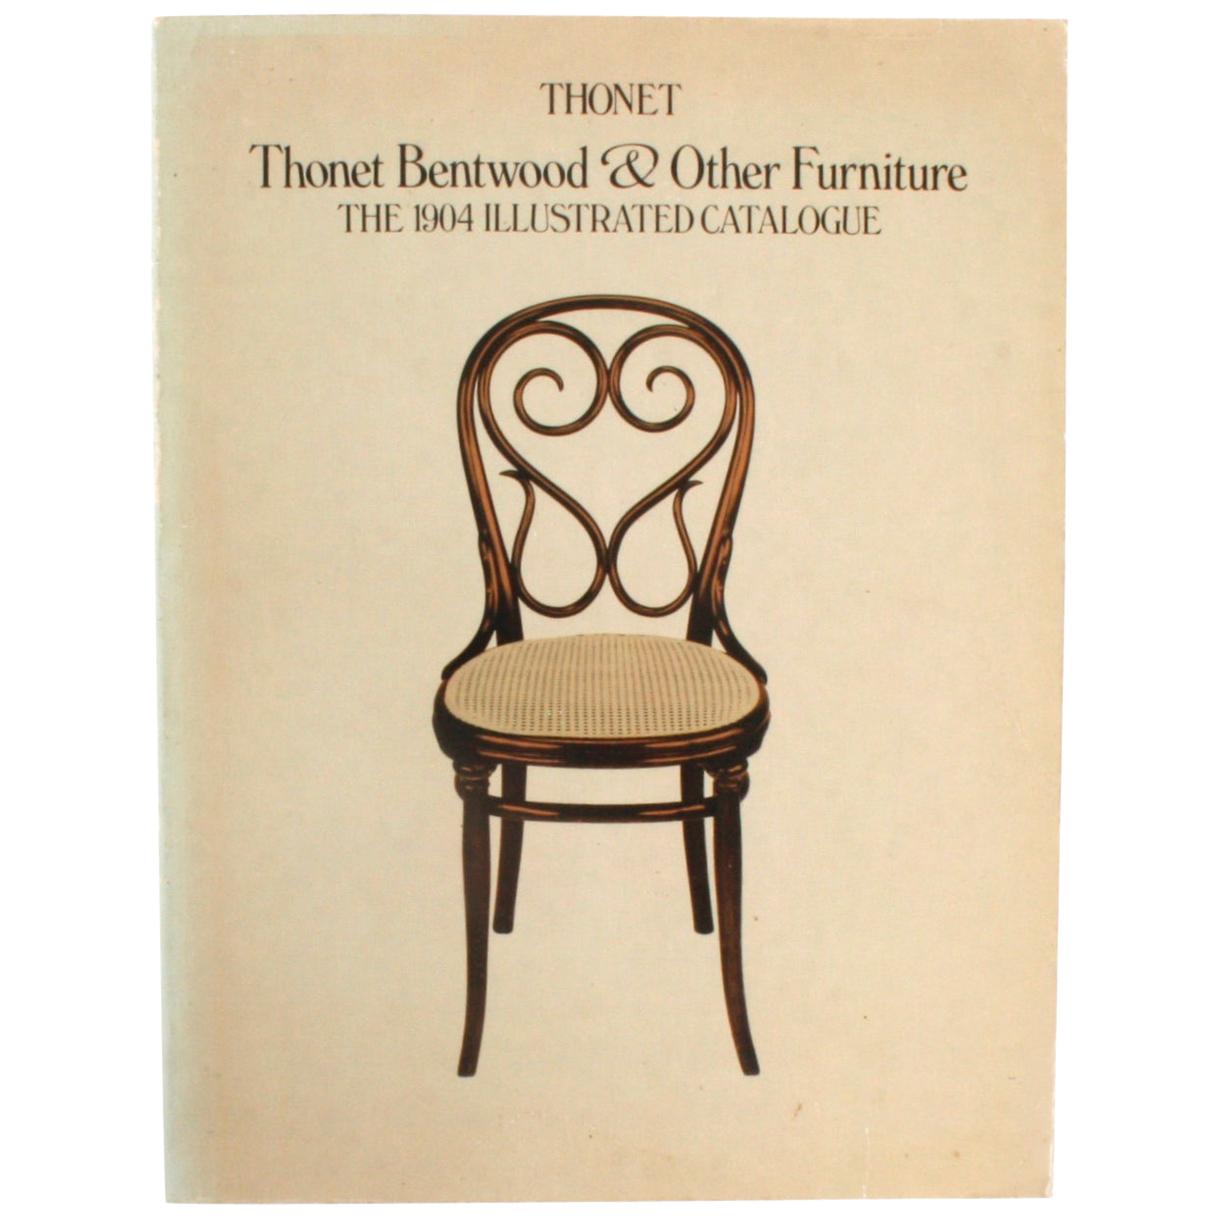 Thonet Bentwood & Other Furniture, Reprint of 1904 Illustrated Catalogue